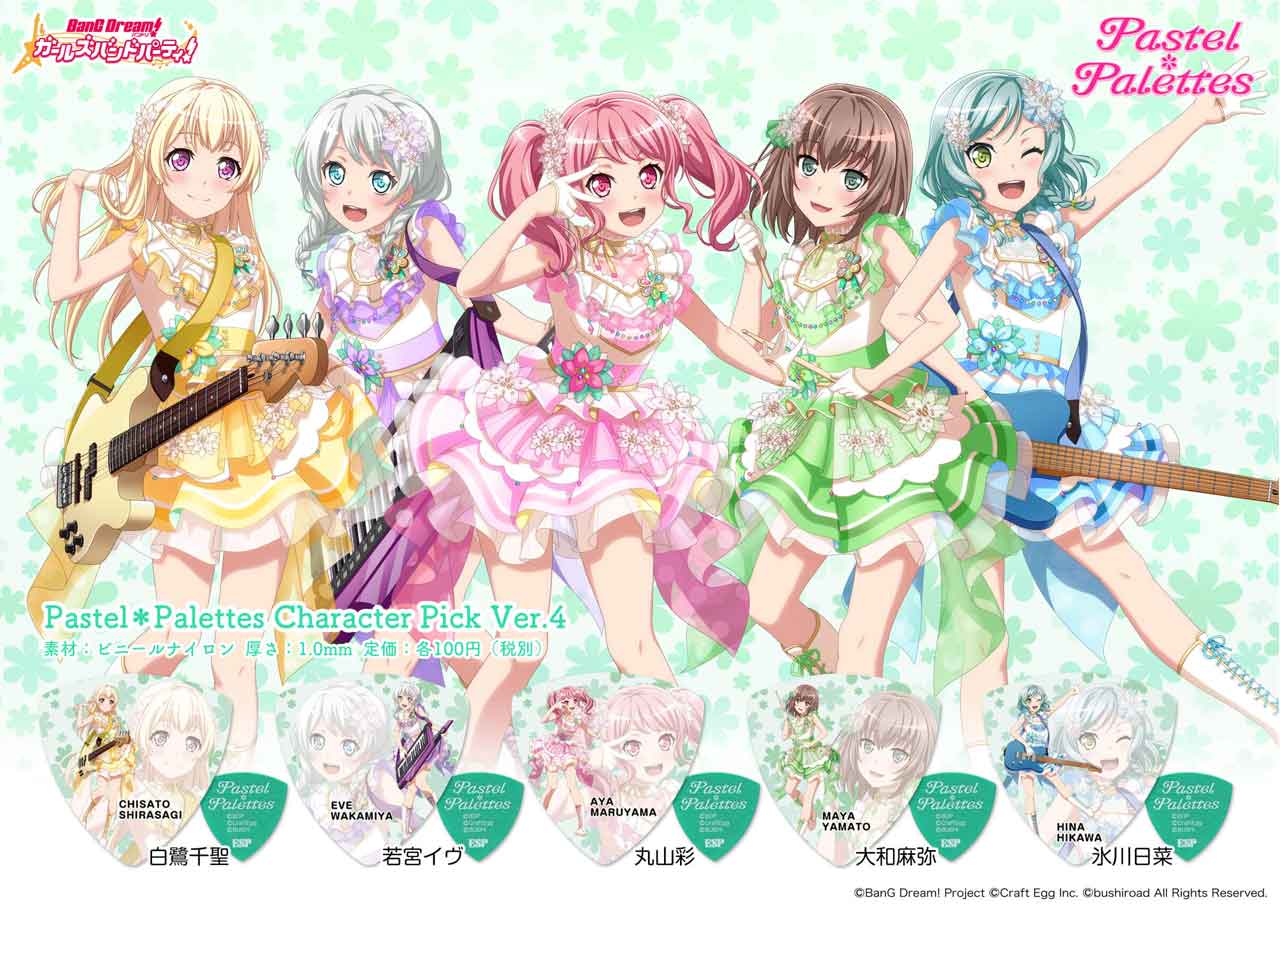 【ESP×BanG Dream!コラボピック】Pastel*Palettes Character Pick Ver.4 "氷川日菜"（GBP HINA PASTEL PALETTES 4）＆”ハメパチ” セット